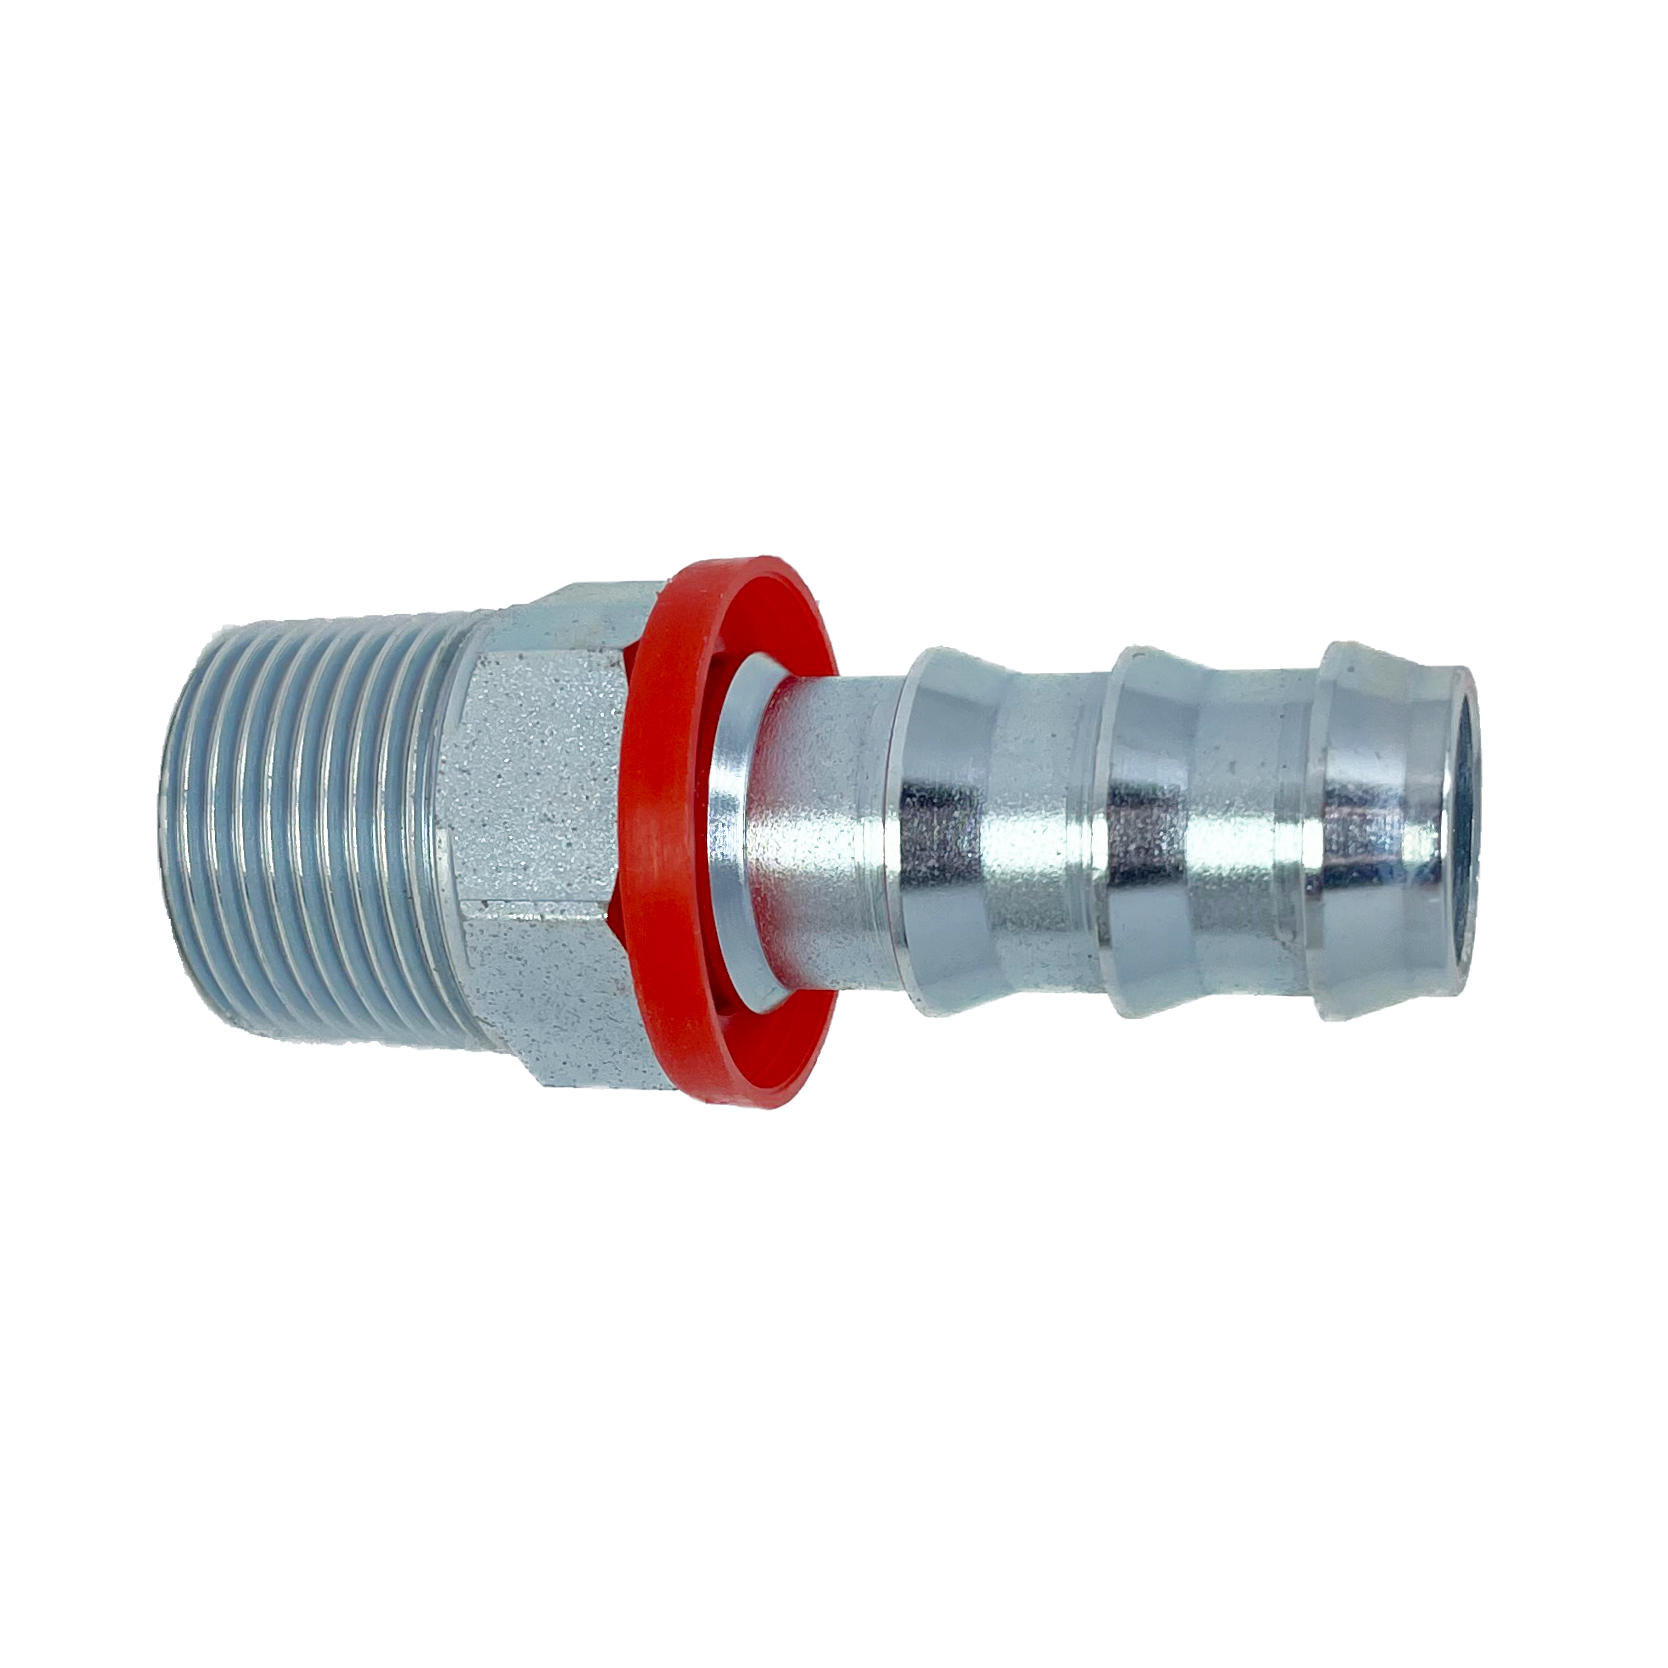 9915-04-04 : Adaptall Straight Adapter, Male 0.25 (1/4") BSPT x 0.25 (1/4") Hose Barb, Carbon Steel